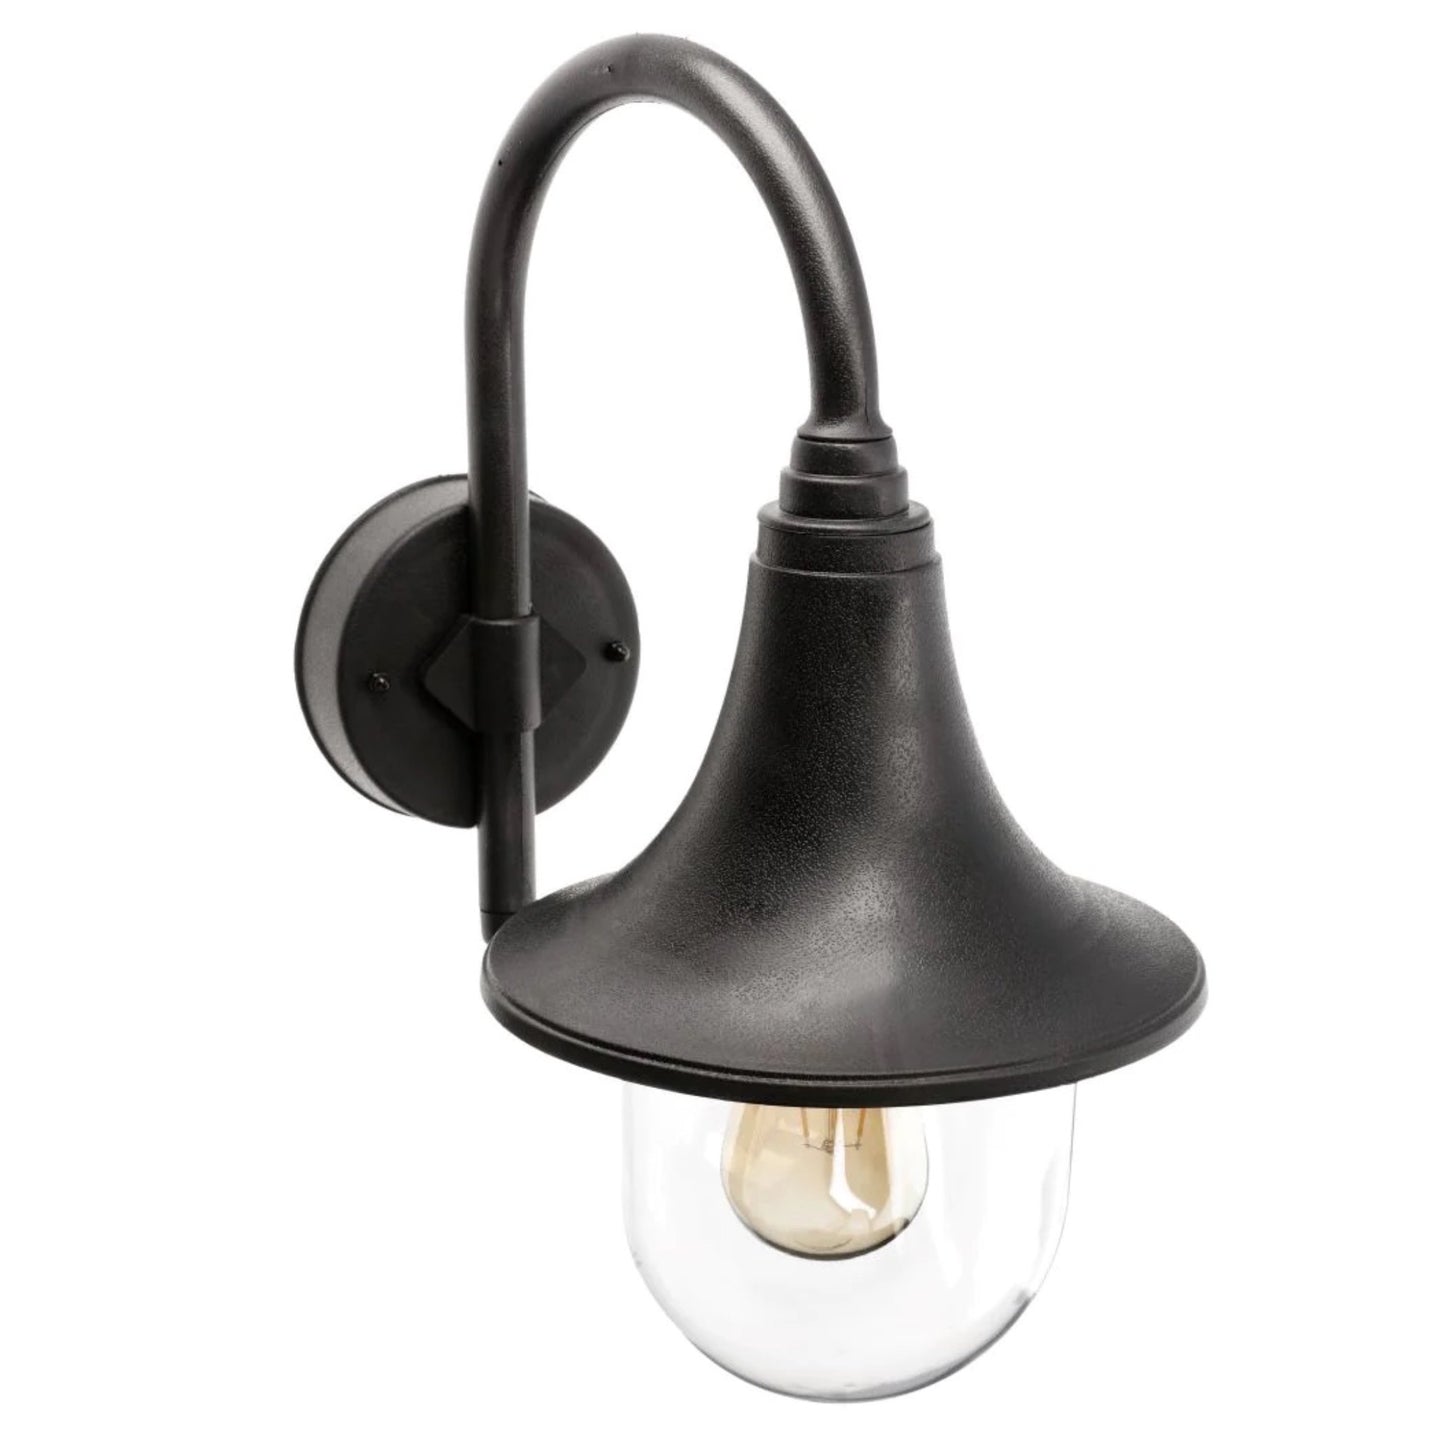 The Dinah black traditional hooked outdoor wall lantern light is constructed of polycarbonate and features an attractive design inspired by traditional lighting styles. This lantern wall light is a great choice for illuminating doorways and porches, creating a warm and inviting look and a safe environment. With an IP44 safety rating, the Dinah garden wall light is suitable for mounting on outdoor walls. Use with LED bulbs enjoy outdoor to enjoy your lighting without raising your energy bills. 